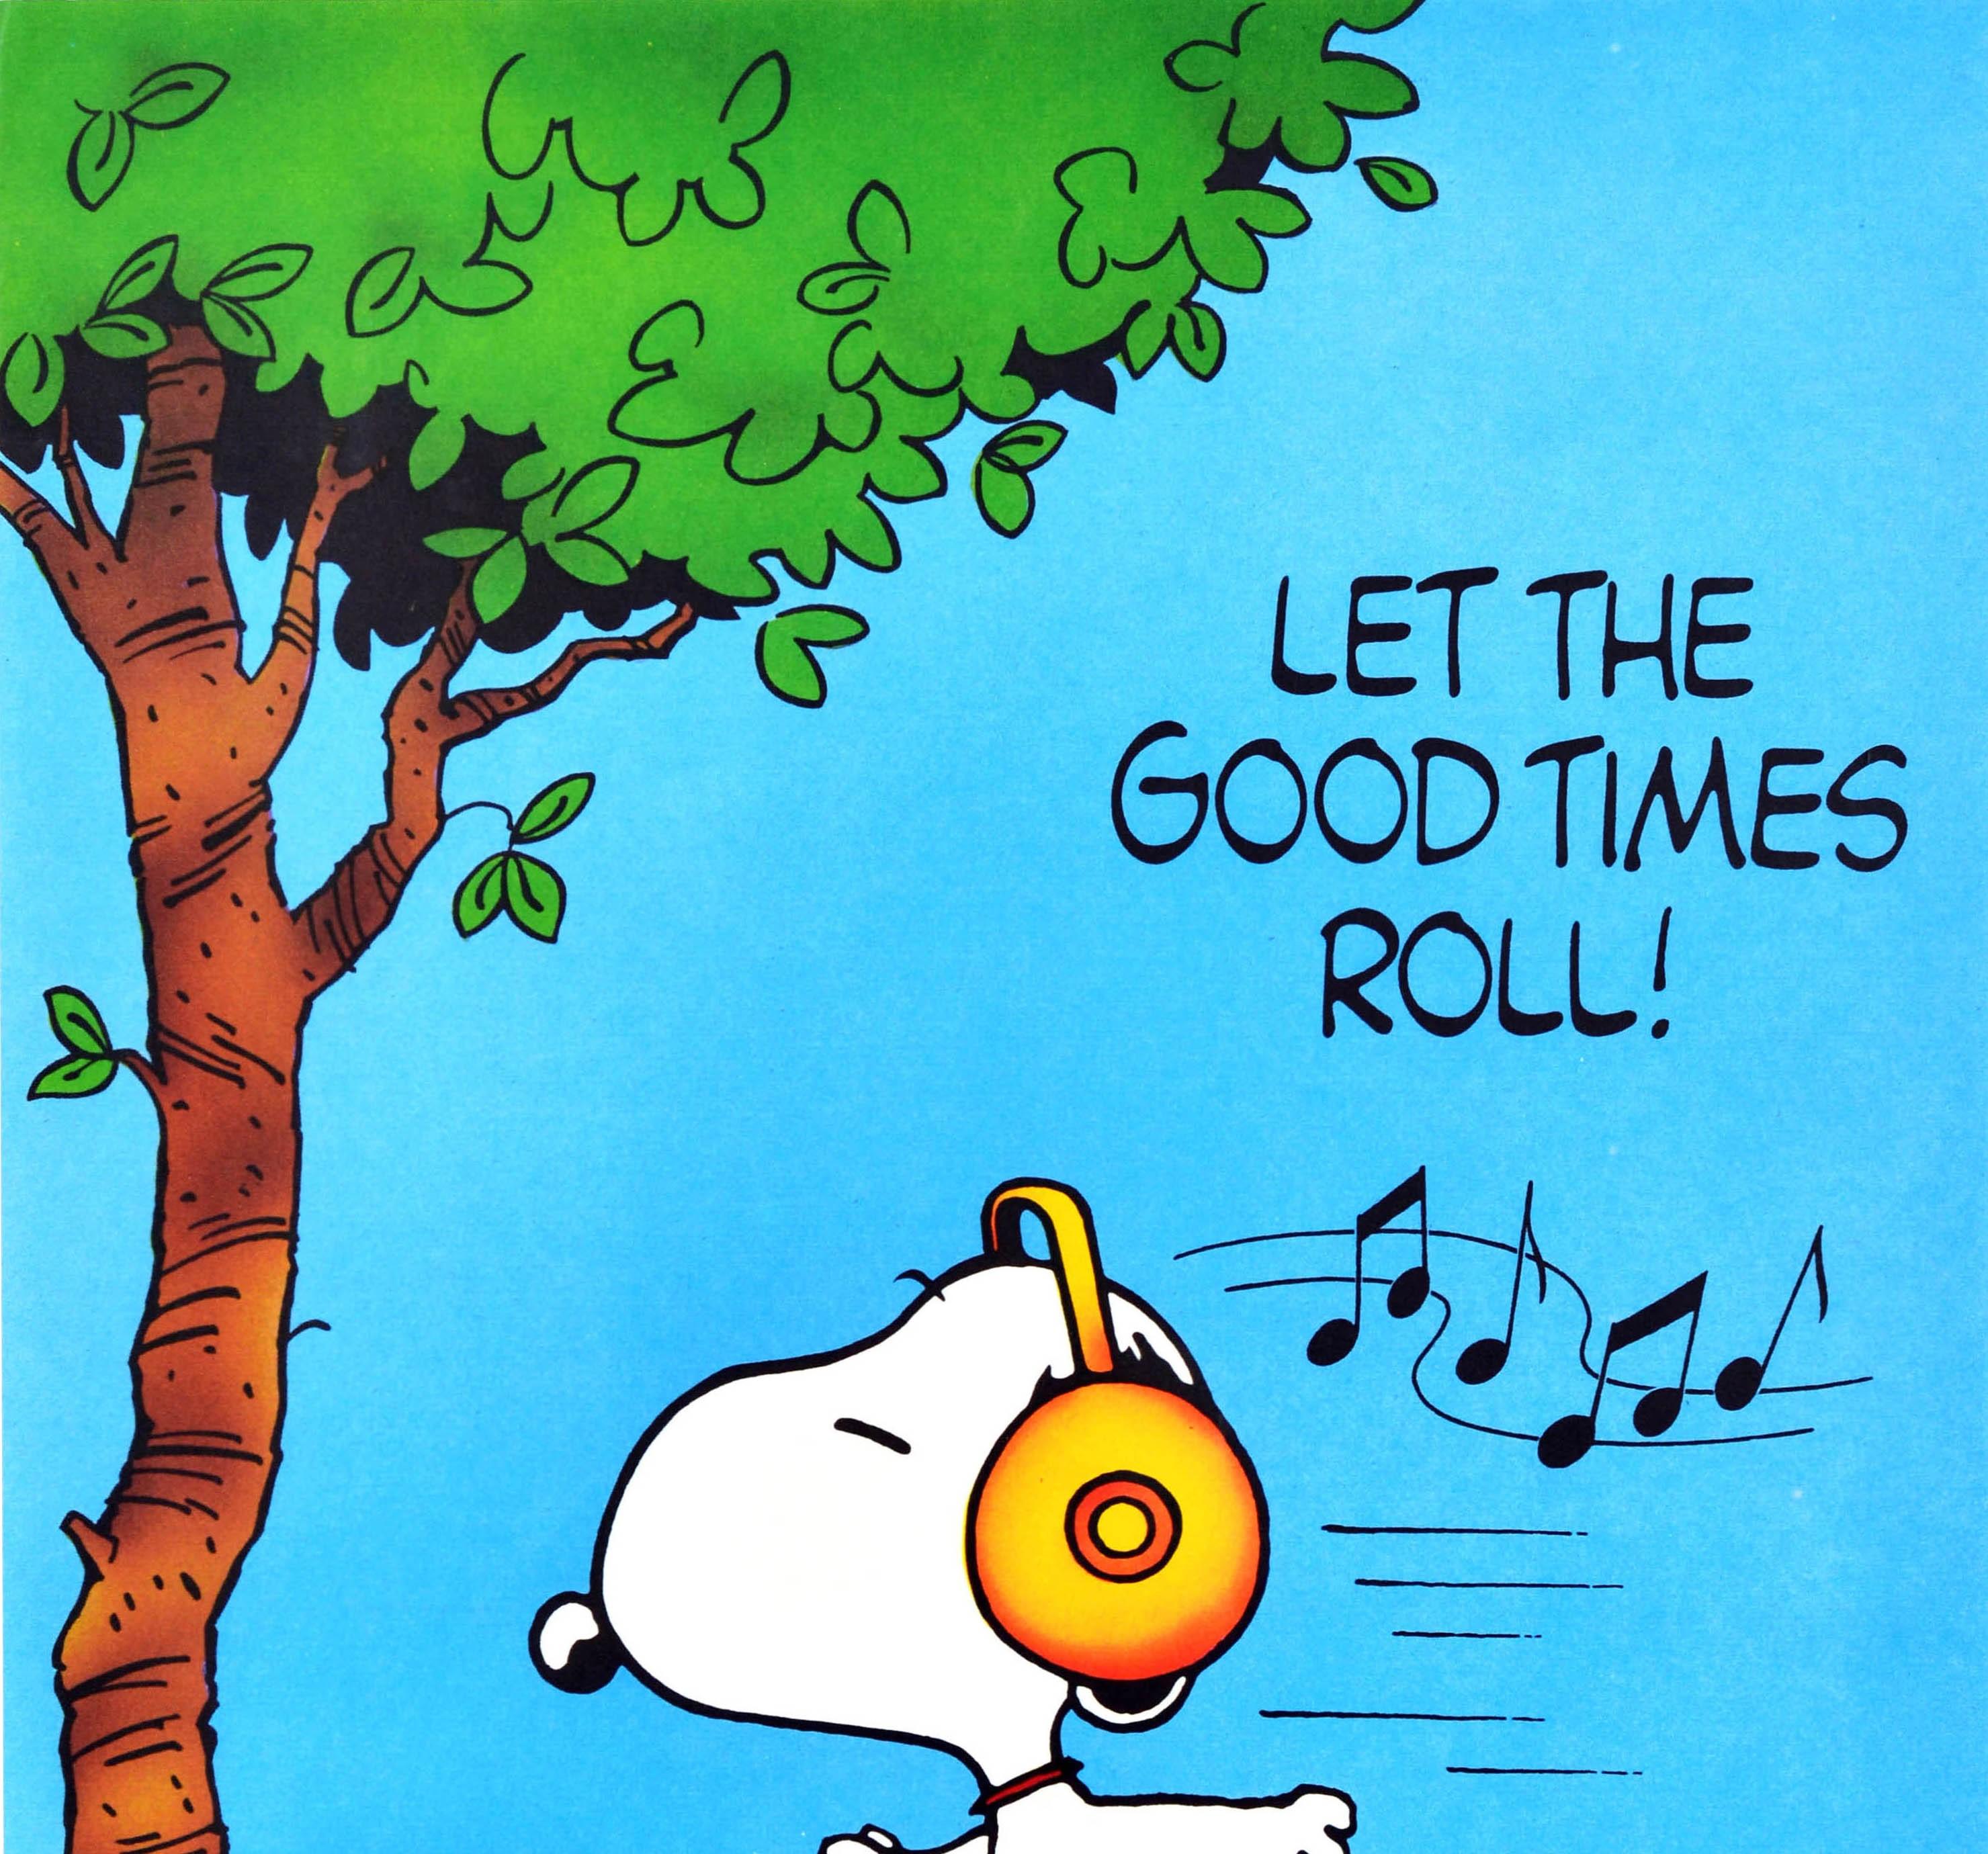 Original Vintage Snoopy Poster Let The Good Times Roll Peanuts Skating Dog Music - Print by Charles M. Schulz